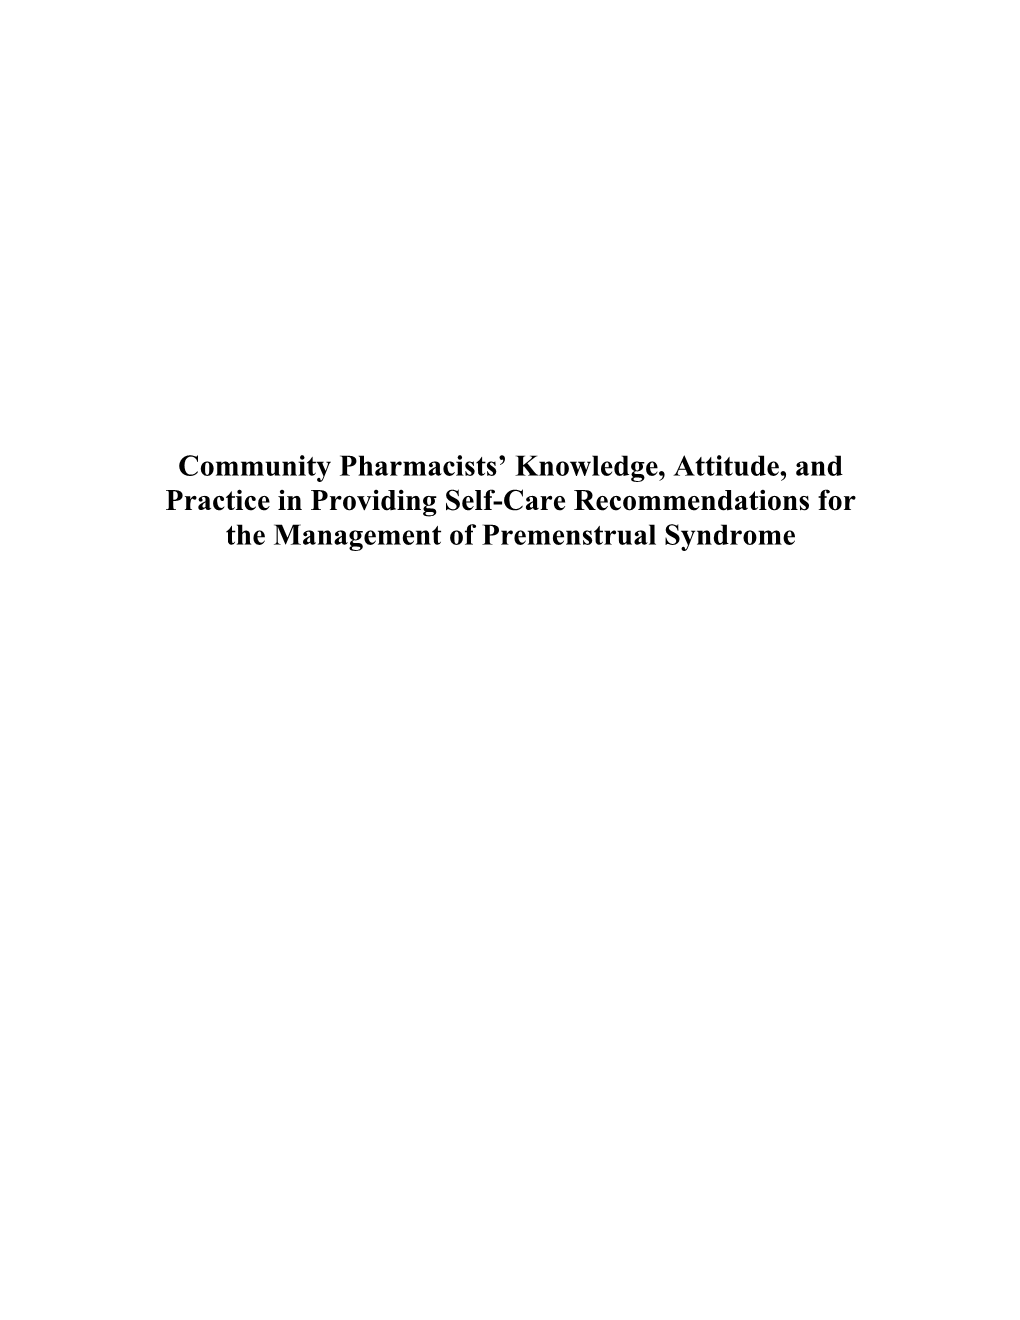 Community Pharmacists' Knowledge, Attitude, and Practice in Providing